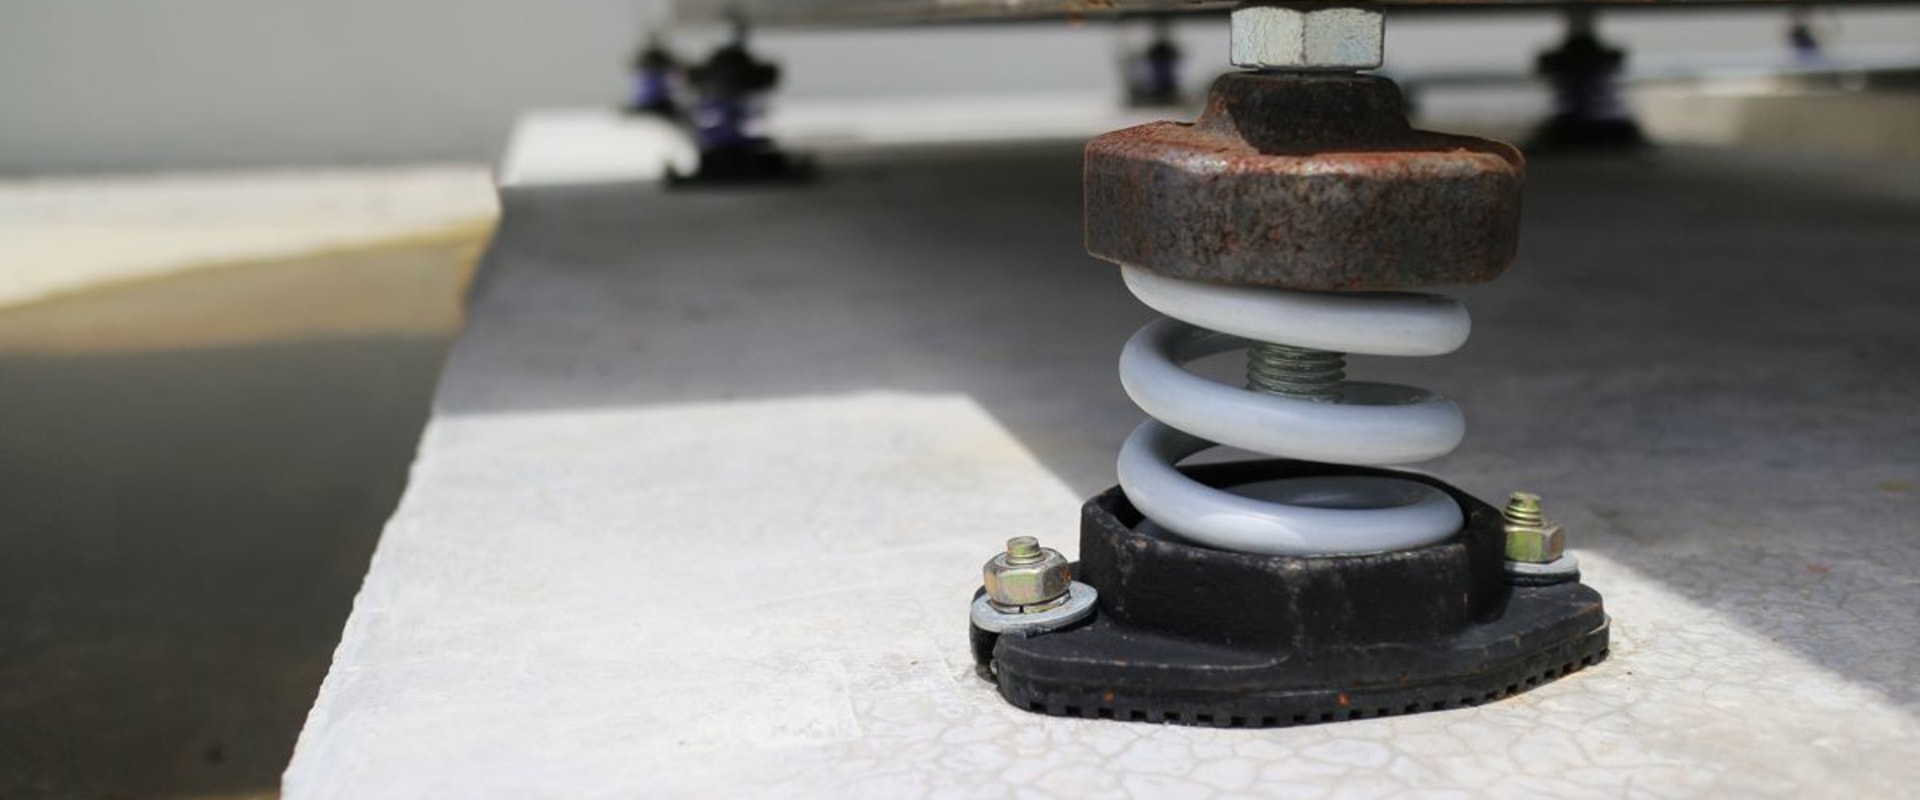 A Guide To Anti-Vibration Products for Fasteners - Application guide